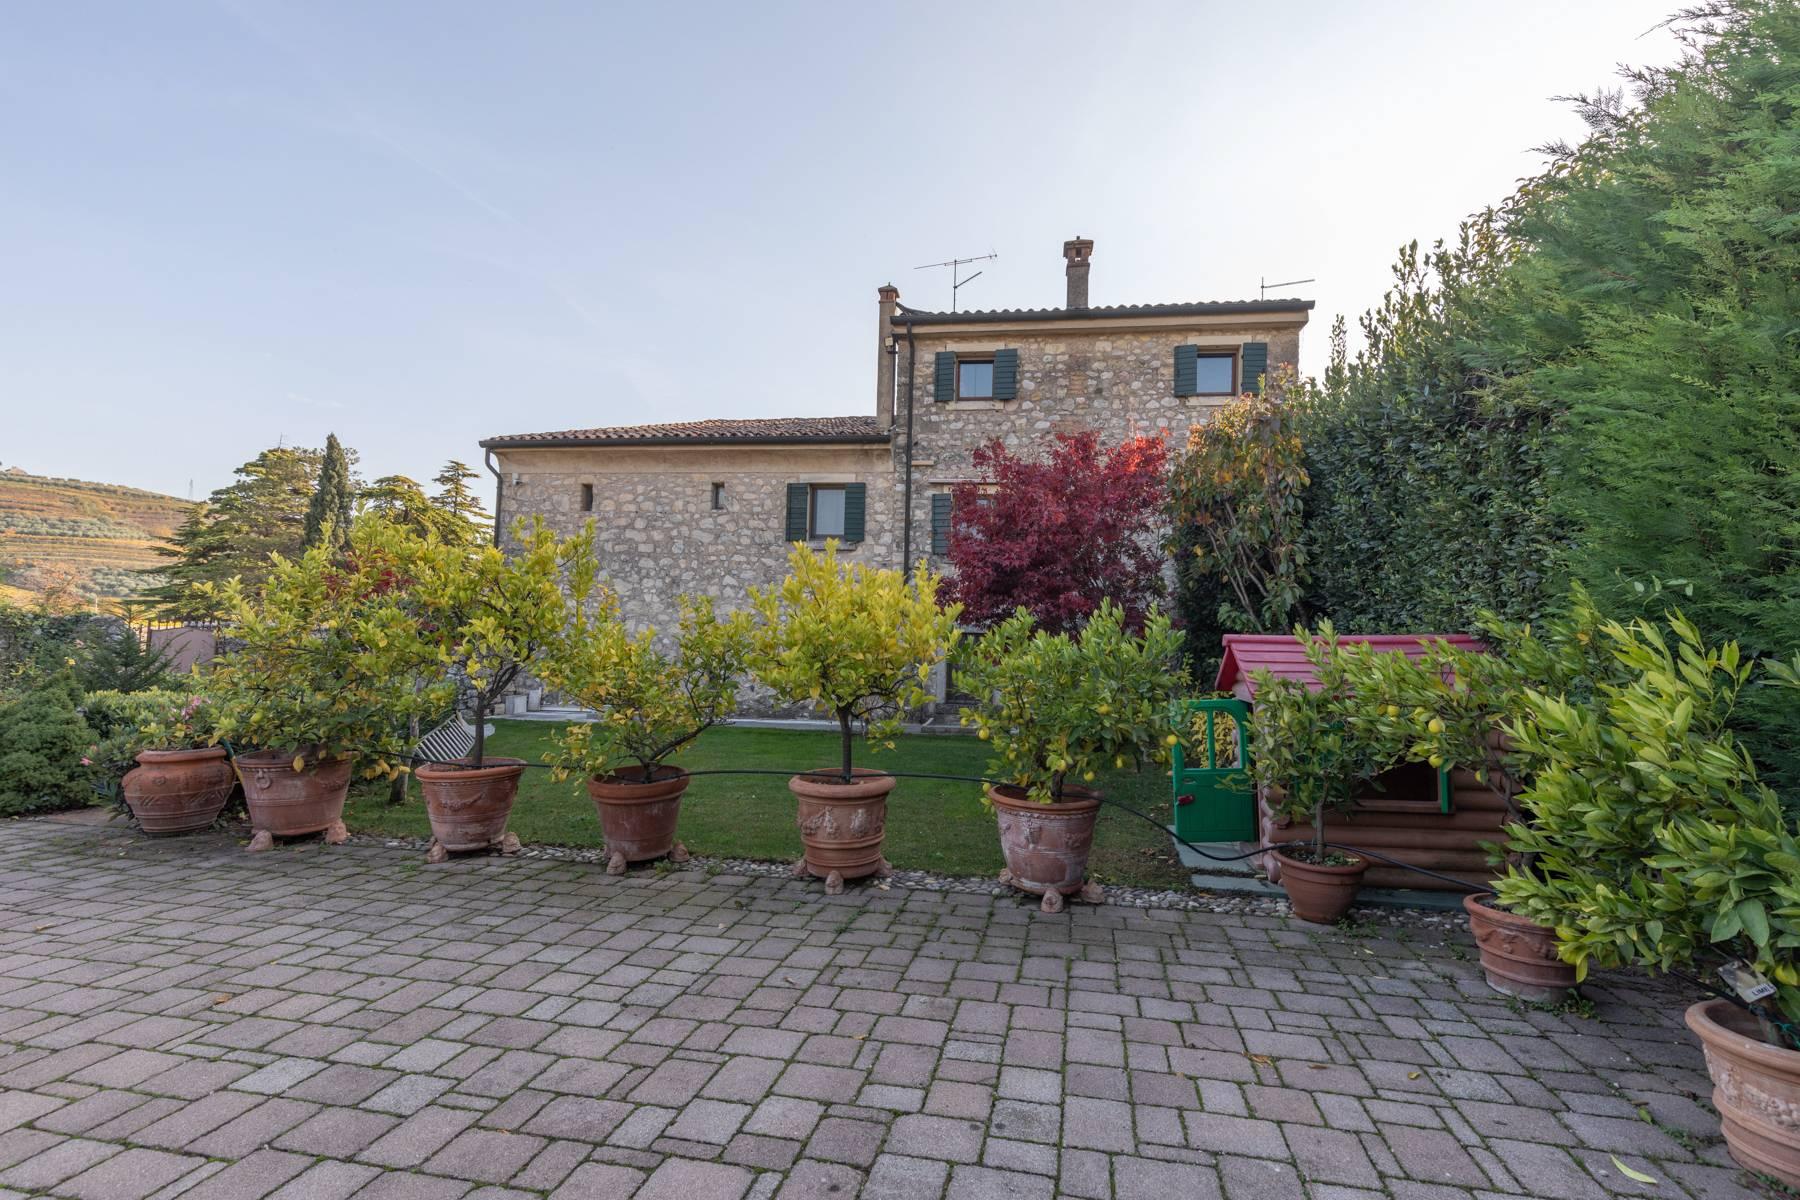 Stunning farmhouse surrounded by vineyards in the Valpolicella area - 32